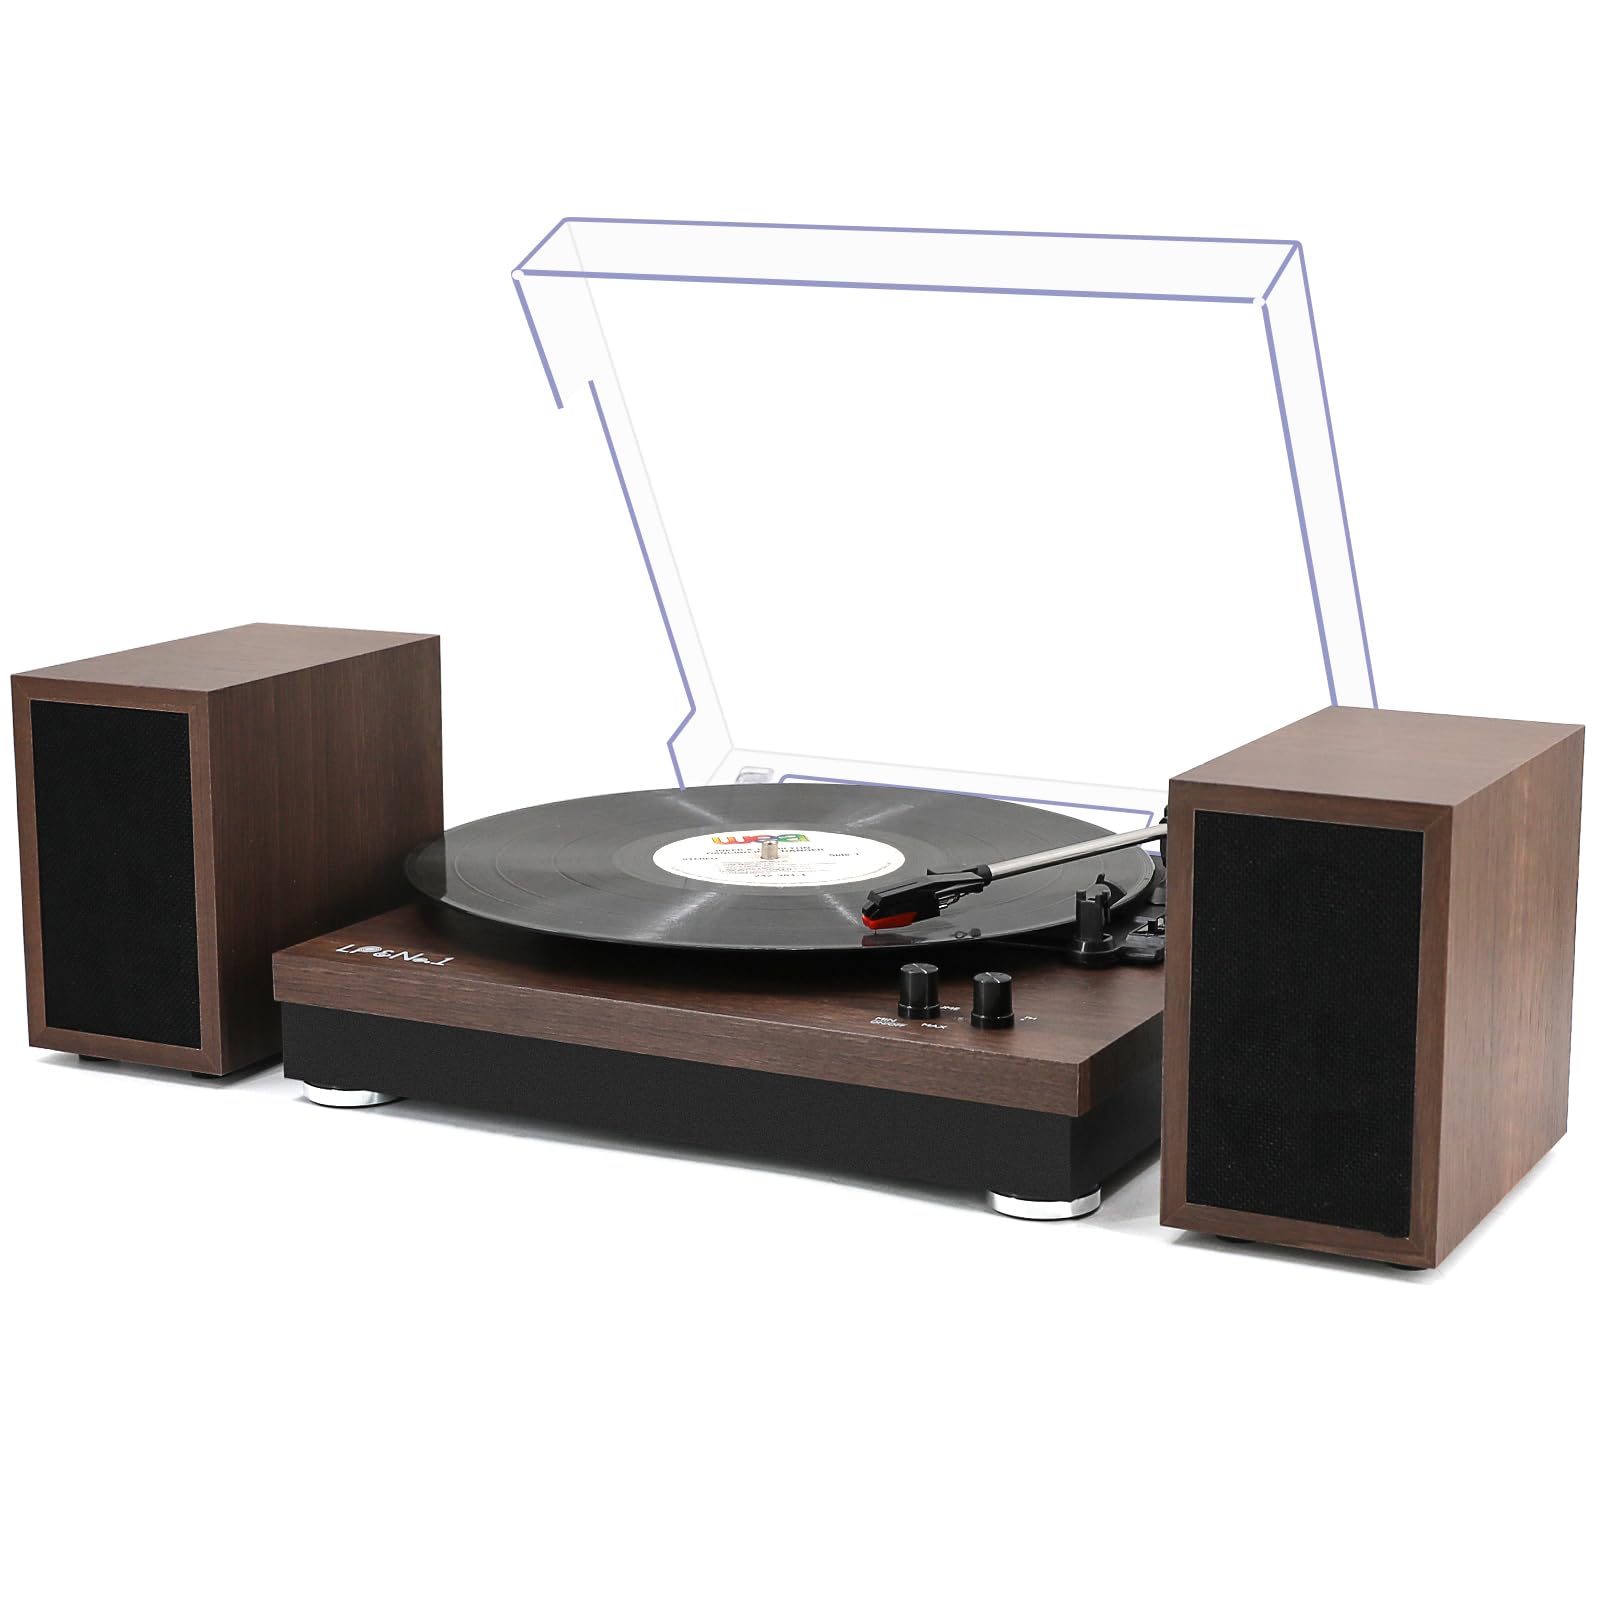 LP&No.1 Vinyl Record Player, Turntable with Stereo Compact External Speakers,  Adjustable 3-Speed Belt-Drive Turntable, LP Player with RCA Jacks, Wireless  Input, Auto-Stop Switch, Walnut Wood - Turntable Players